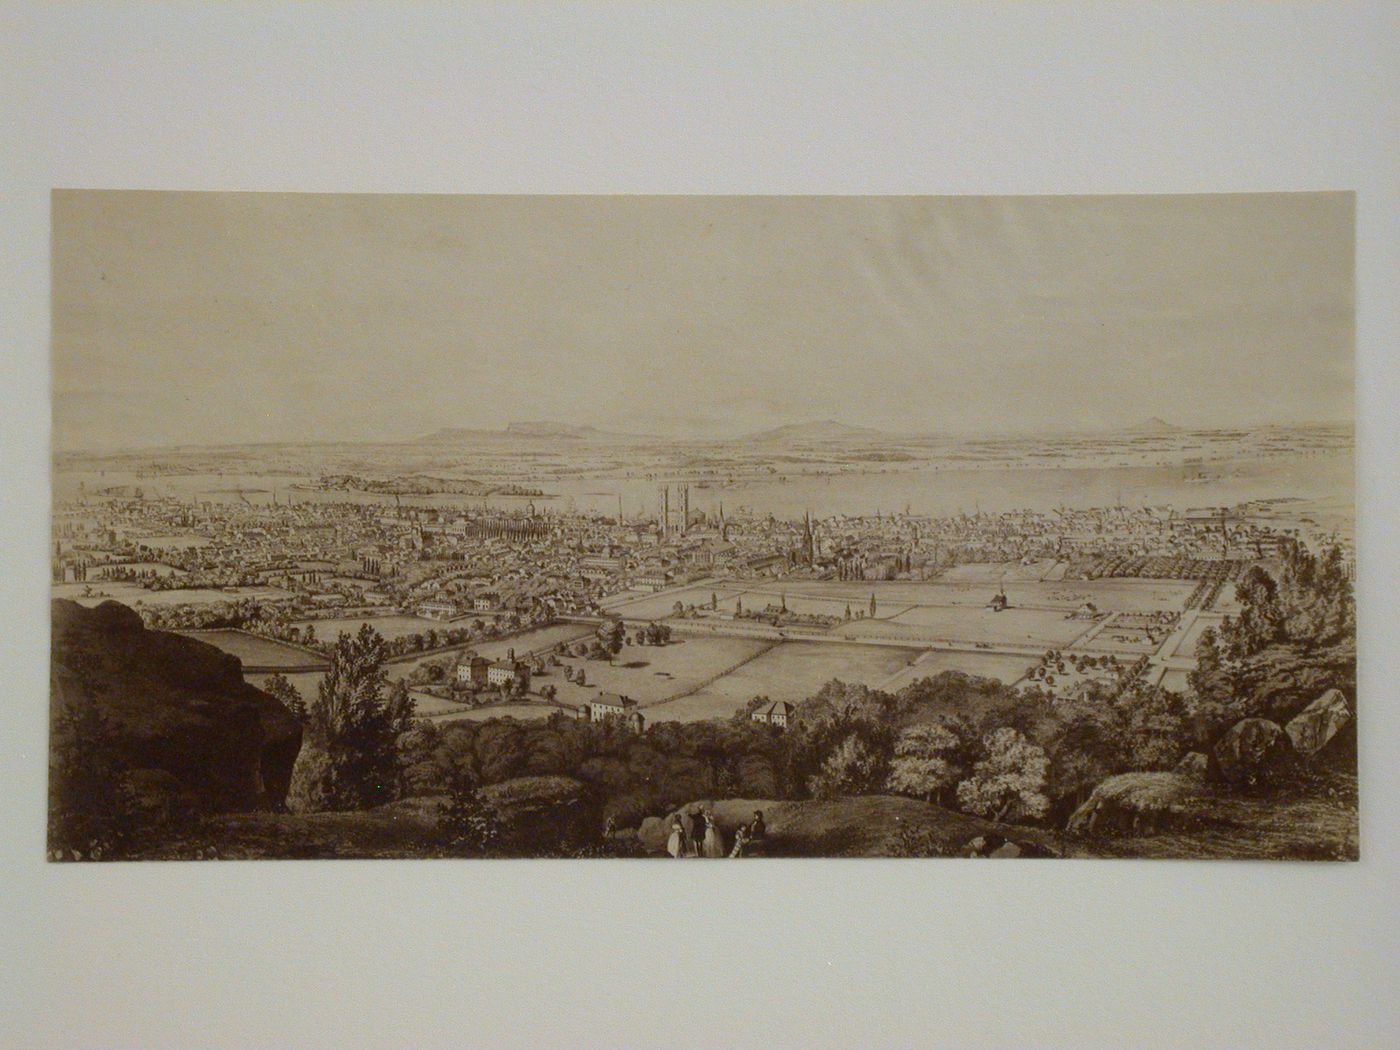 Photograph of a lithography titled "Montreal, Canada East", by Edwin Whitefield showing Montréal as seen from Mount Royal in the mid 19th century, Montréal, Québec